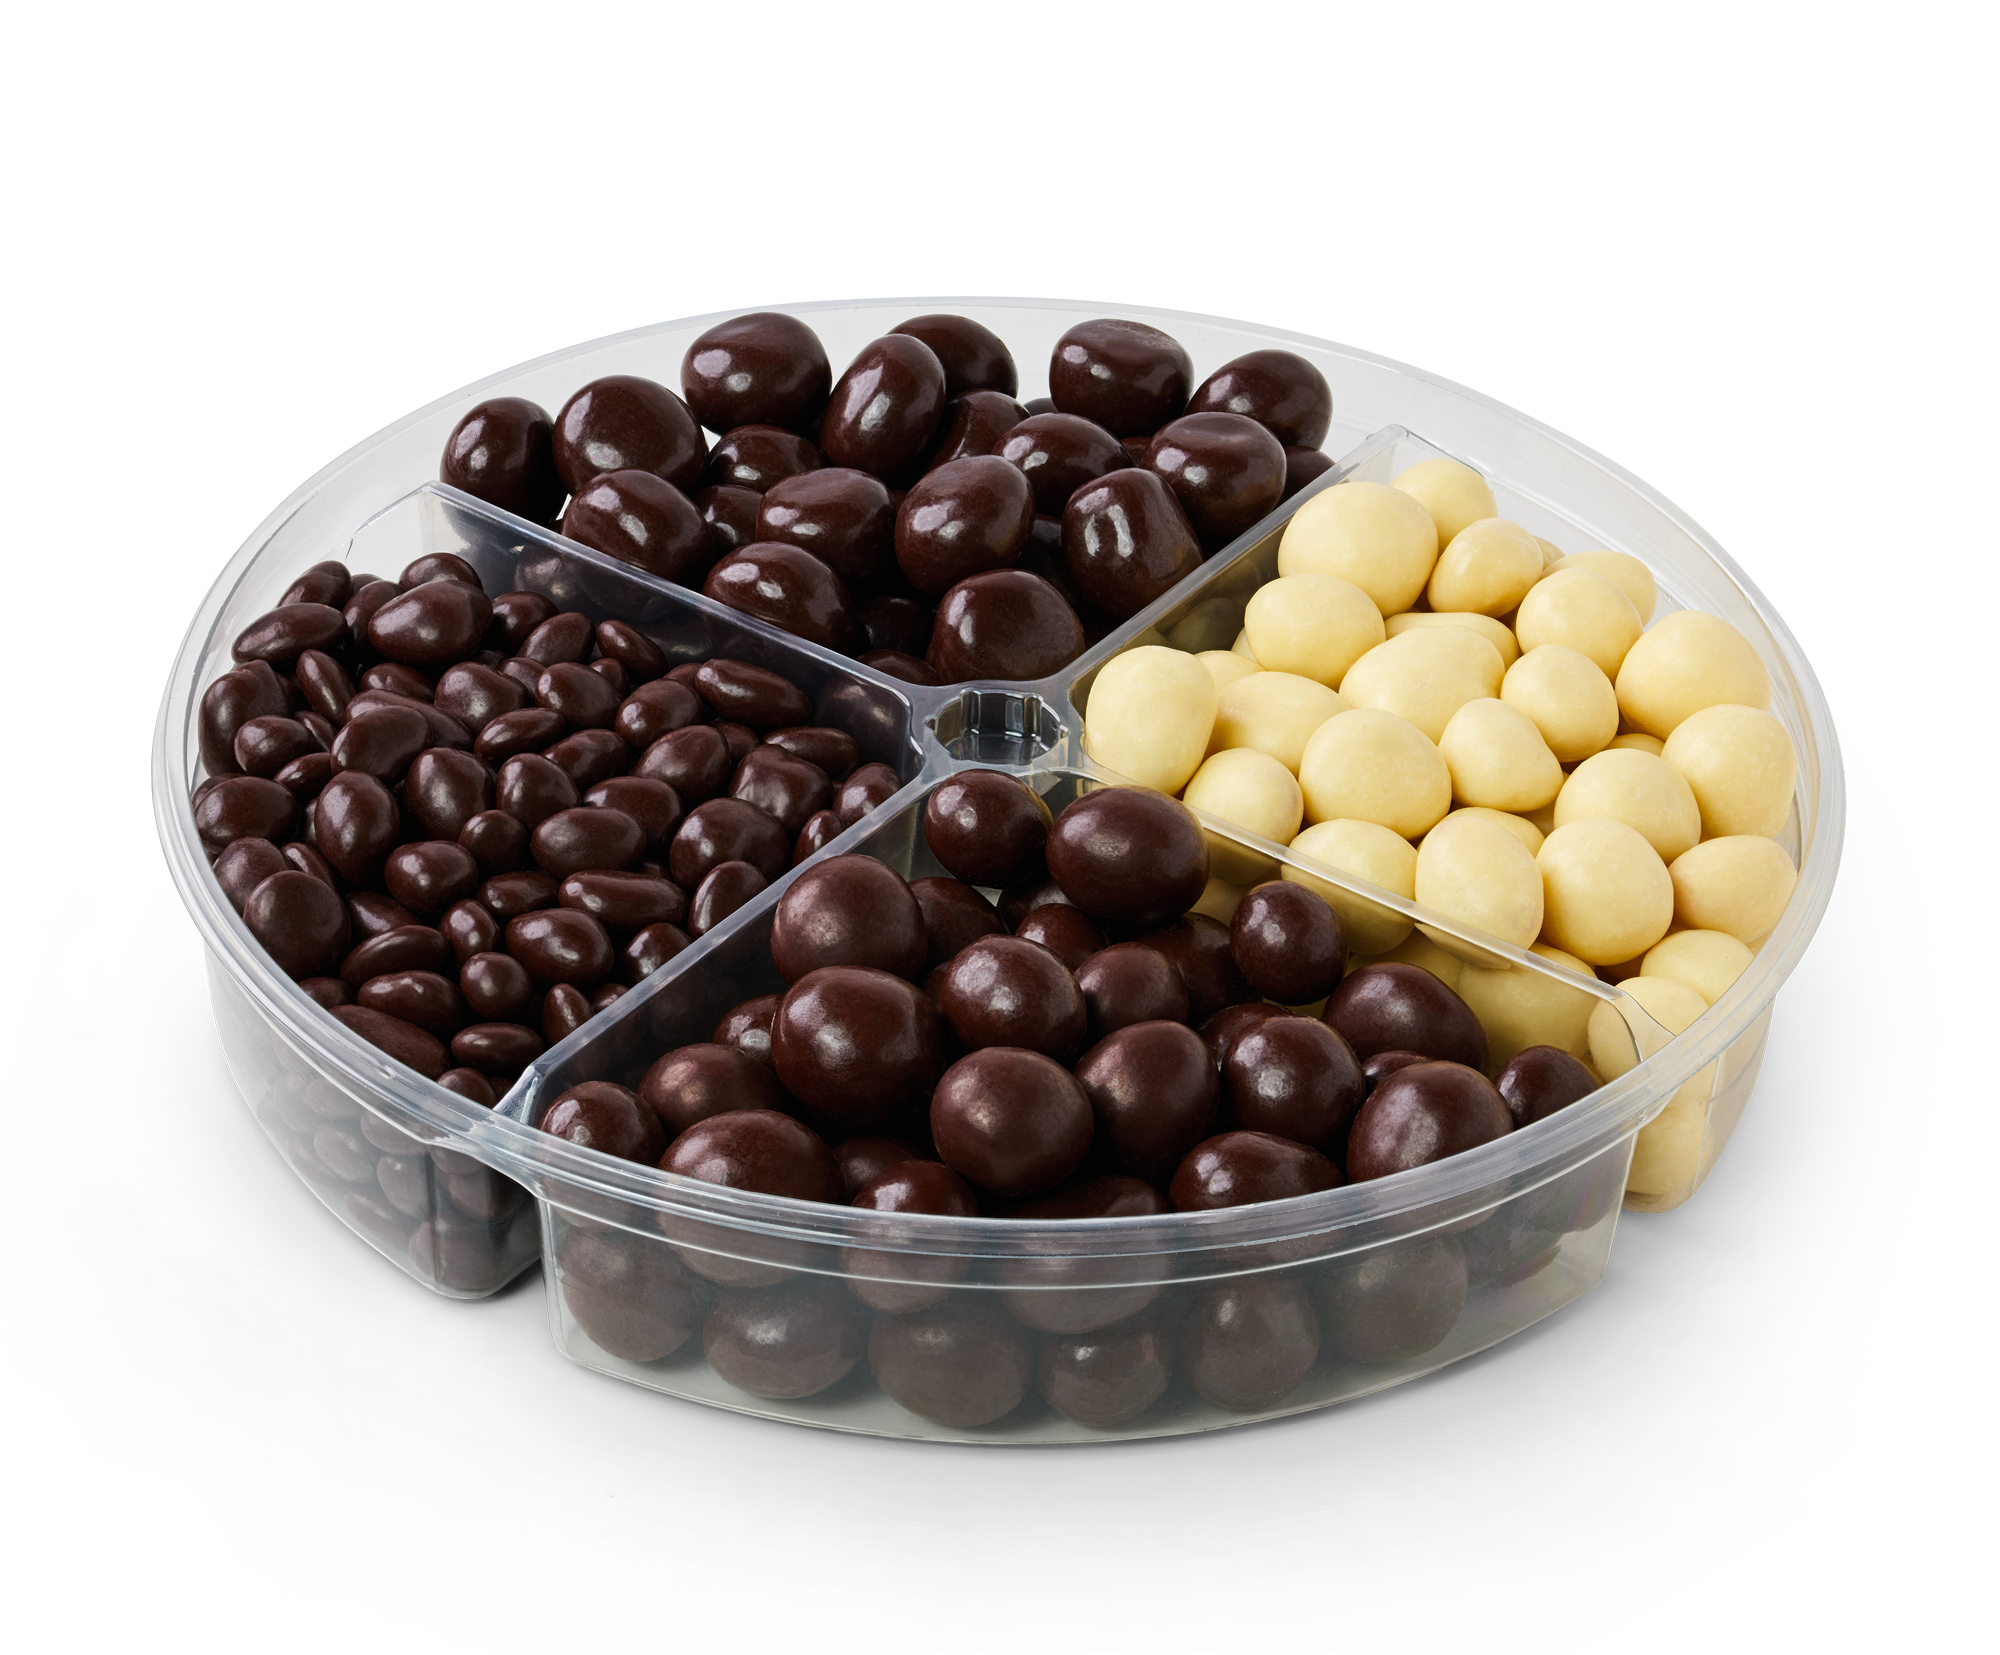 Large 4-Flavor Fruit Tray